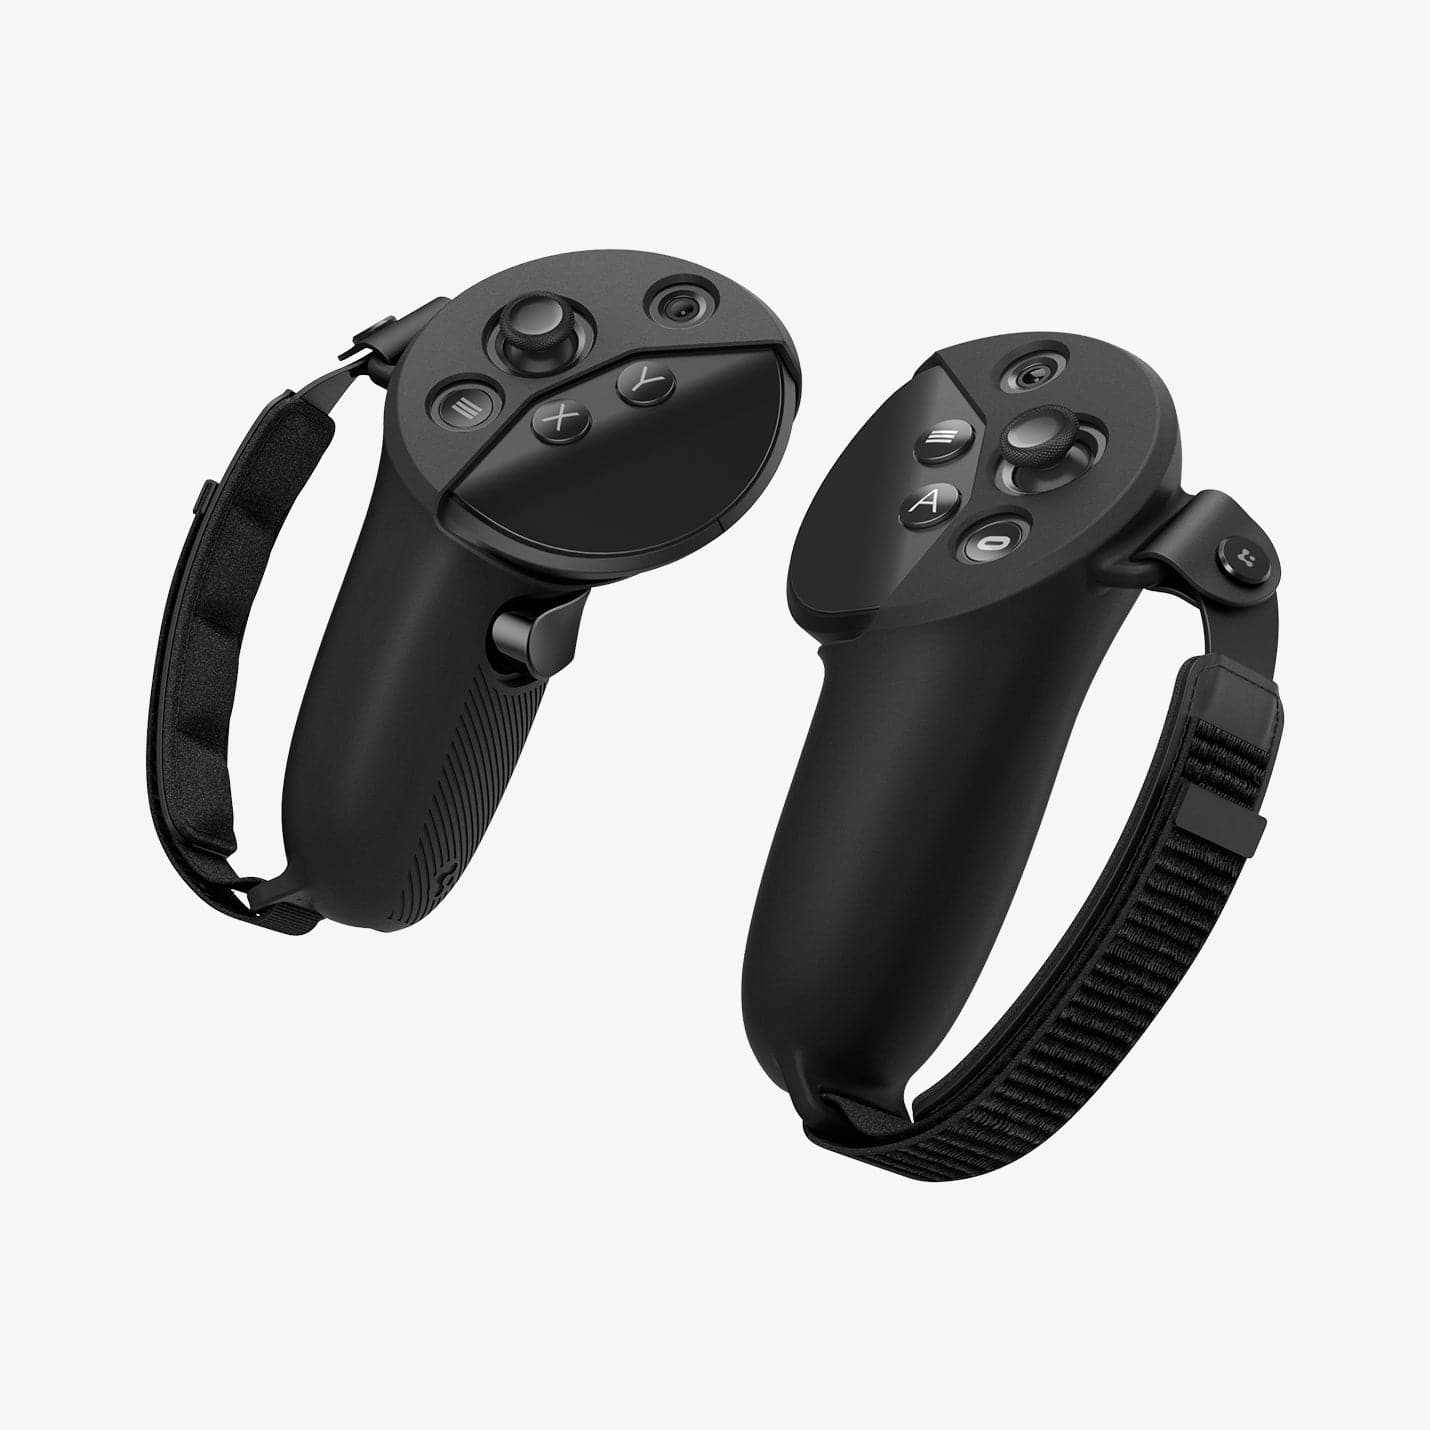 ACS06030 - Meta Quest Pro Controller Silicone Fit in black showing the front and sides of both controllers